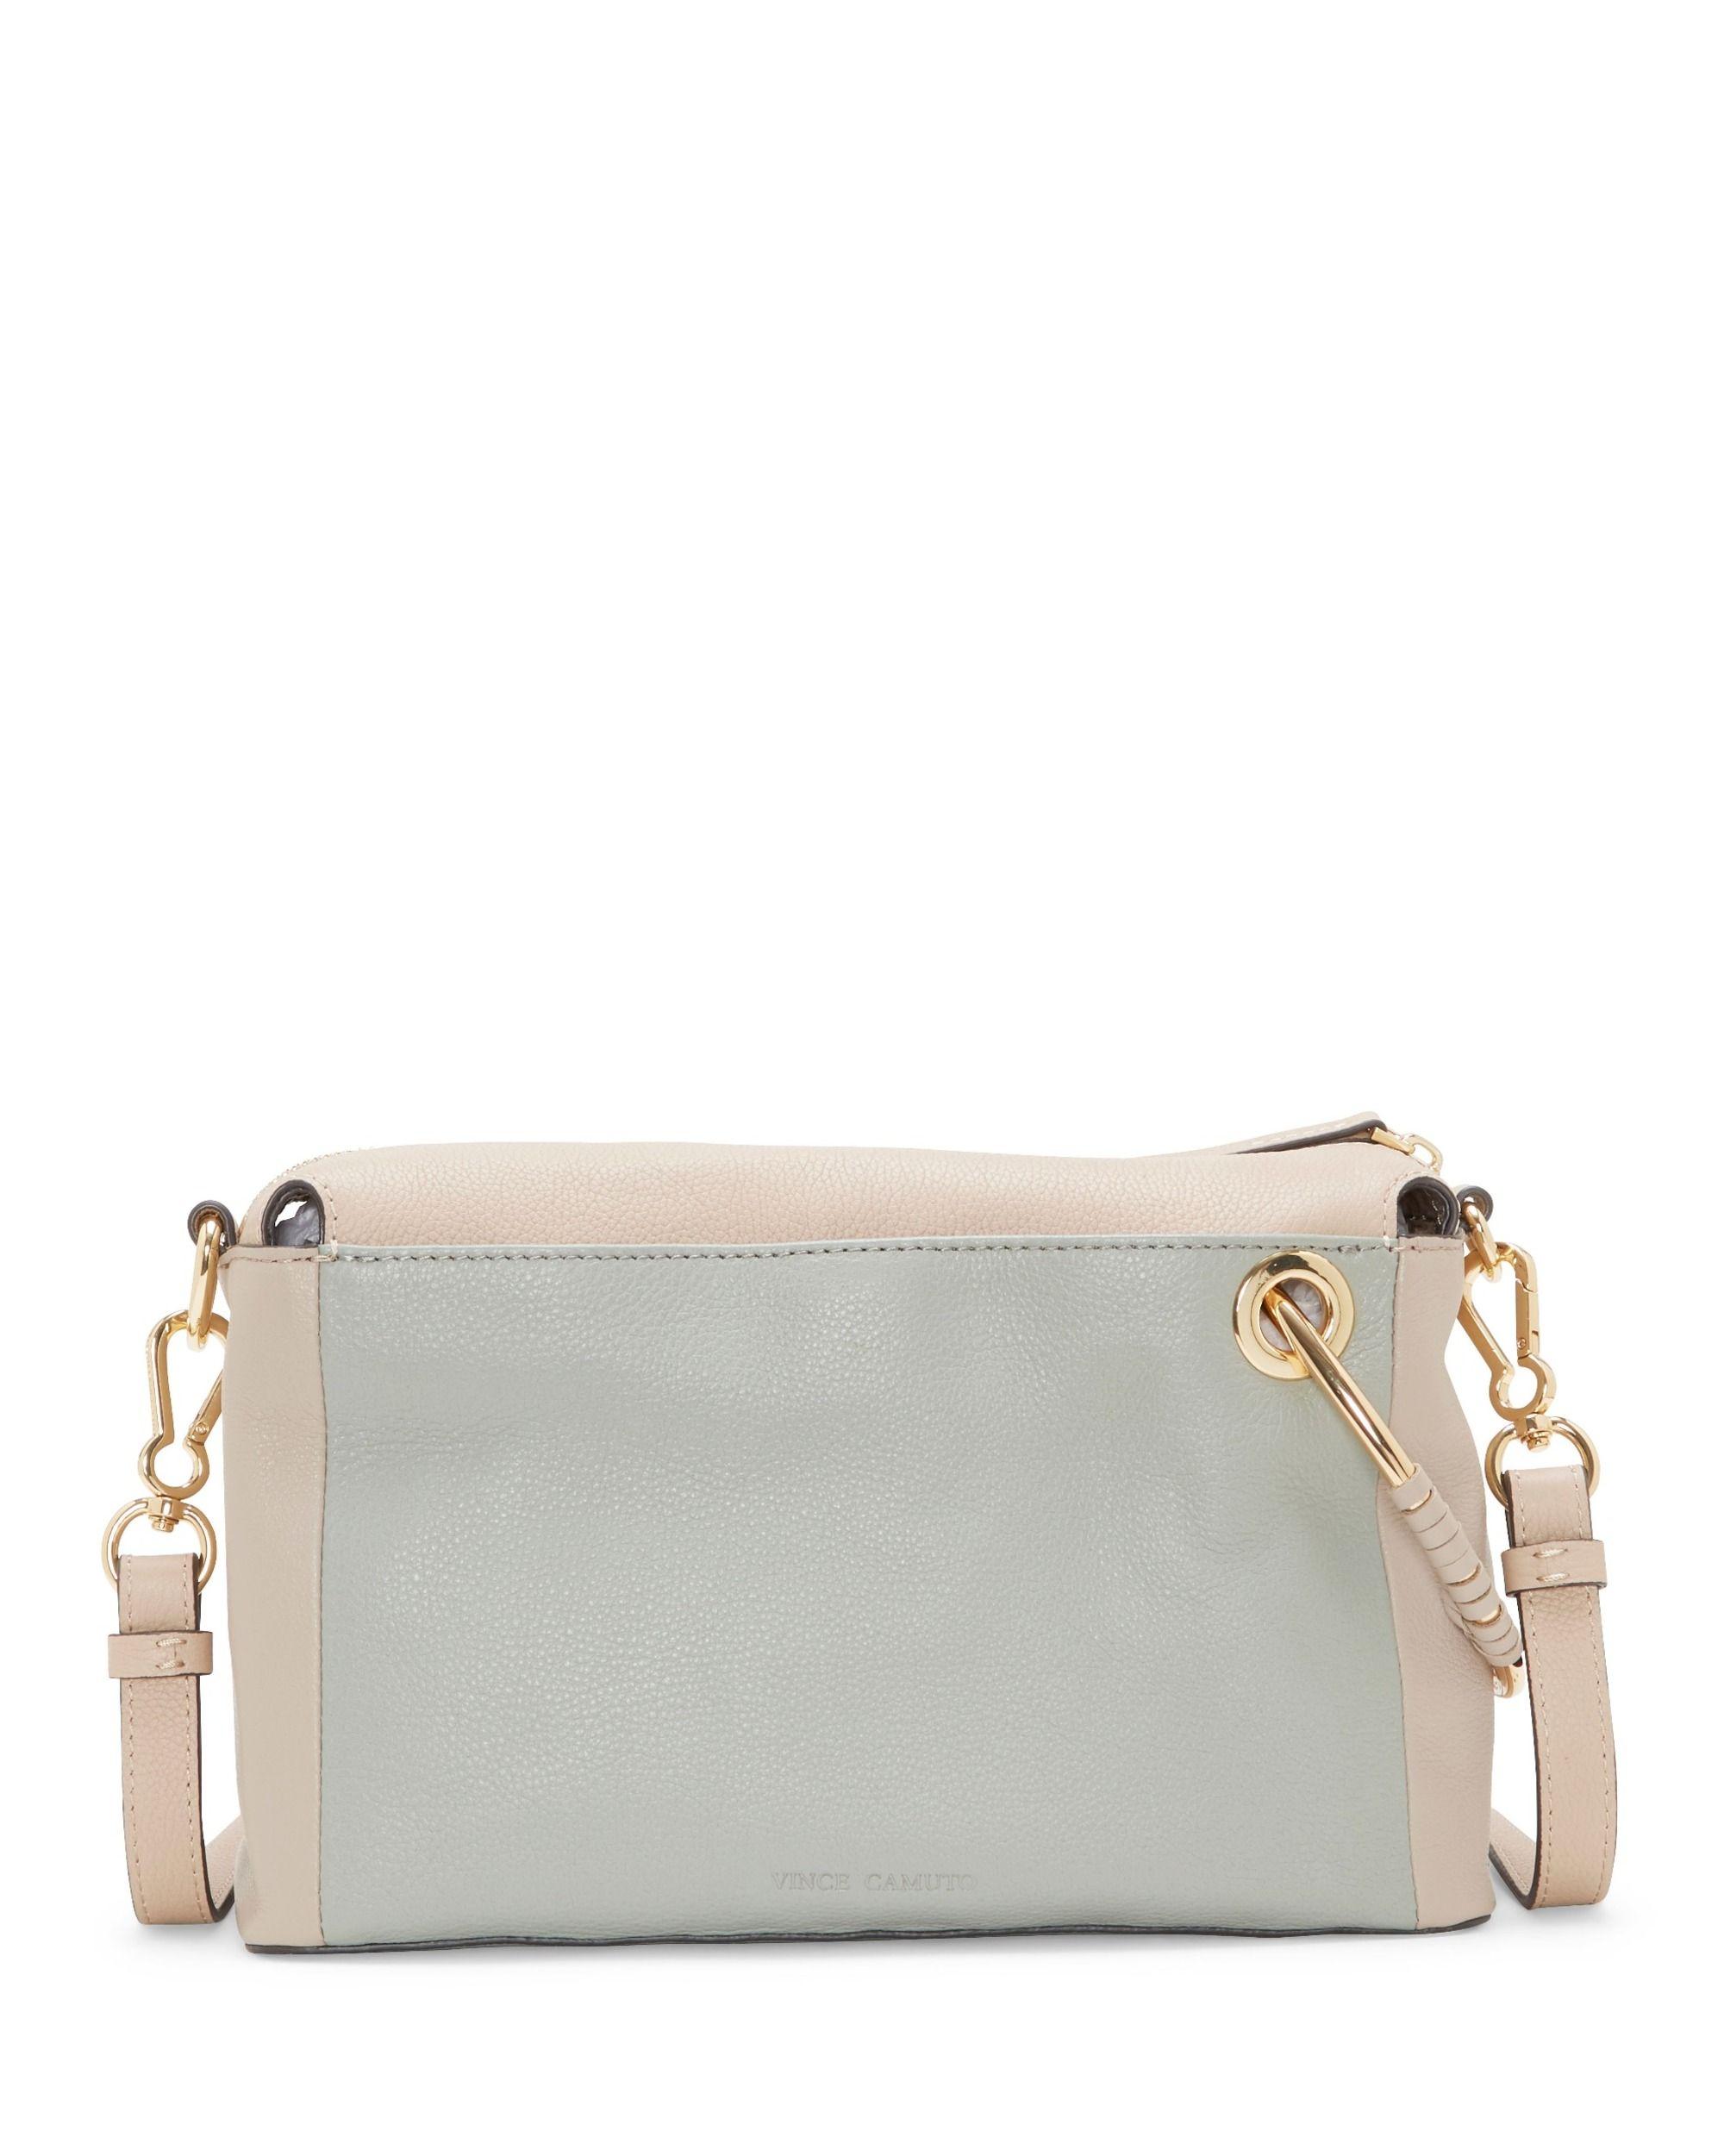 Vince Camuto Leather Margi – Ring-accent Shoulder Bag in Gray - Lyst